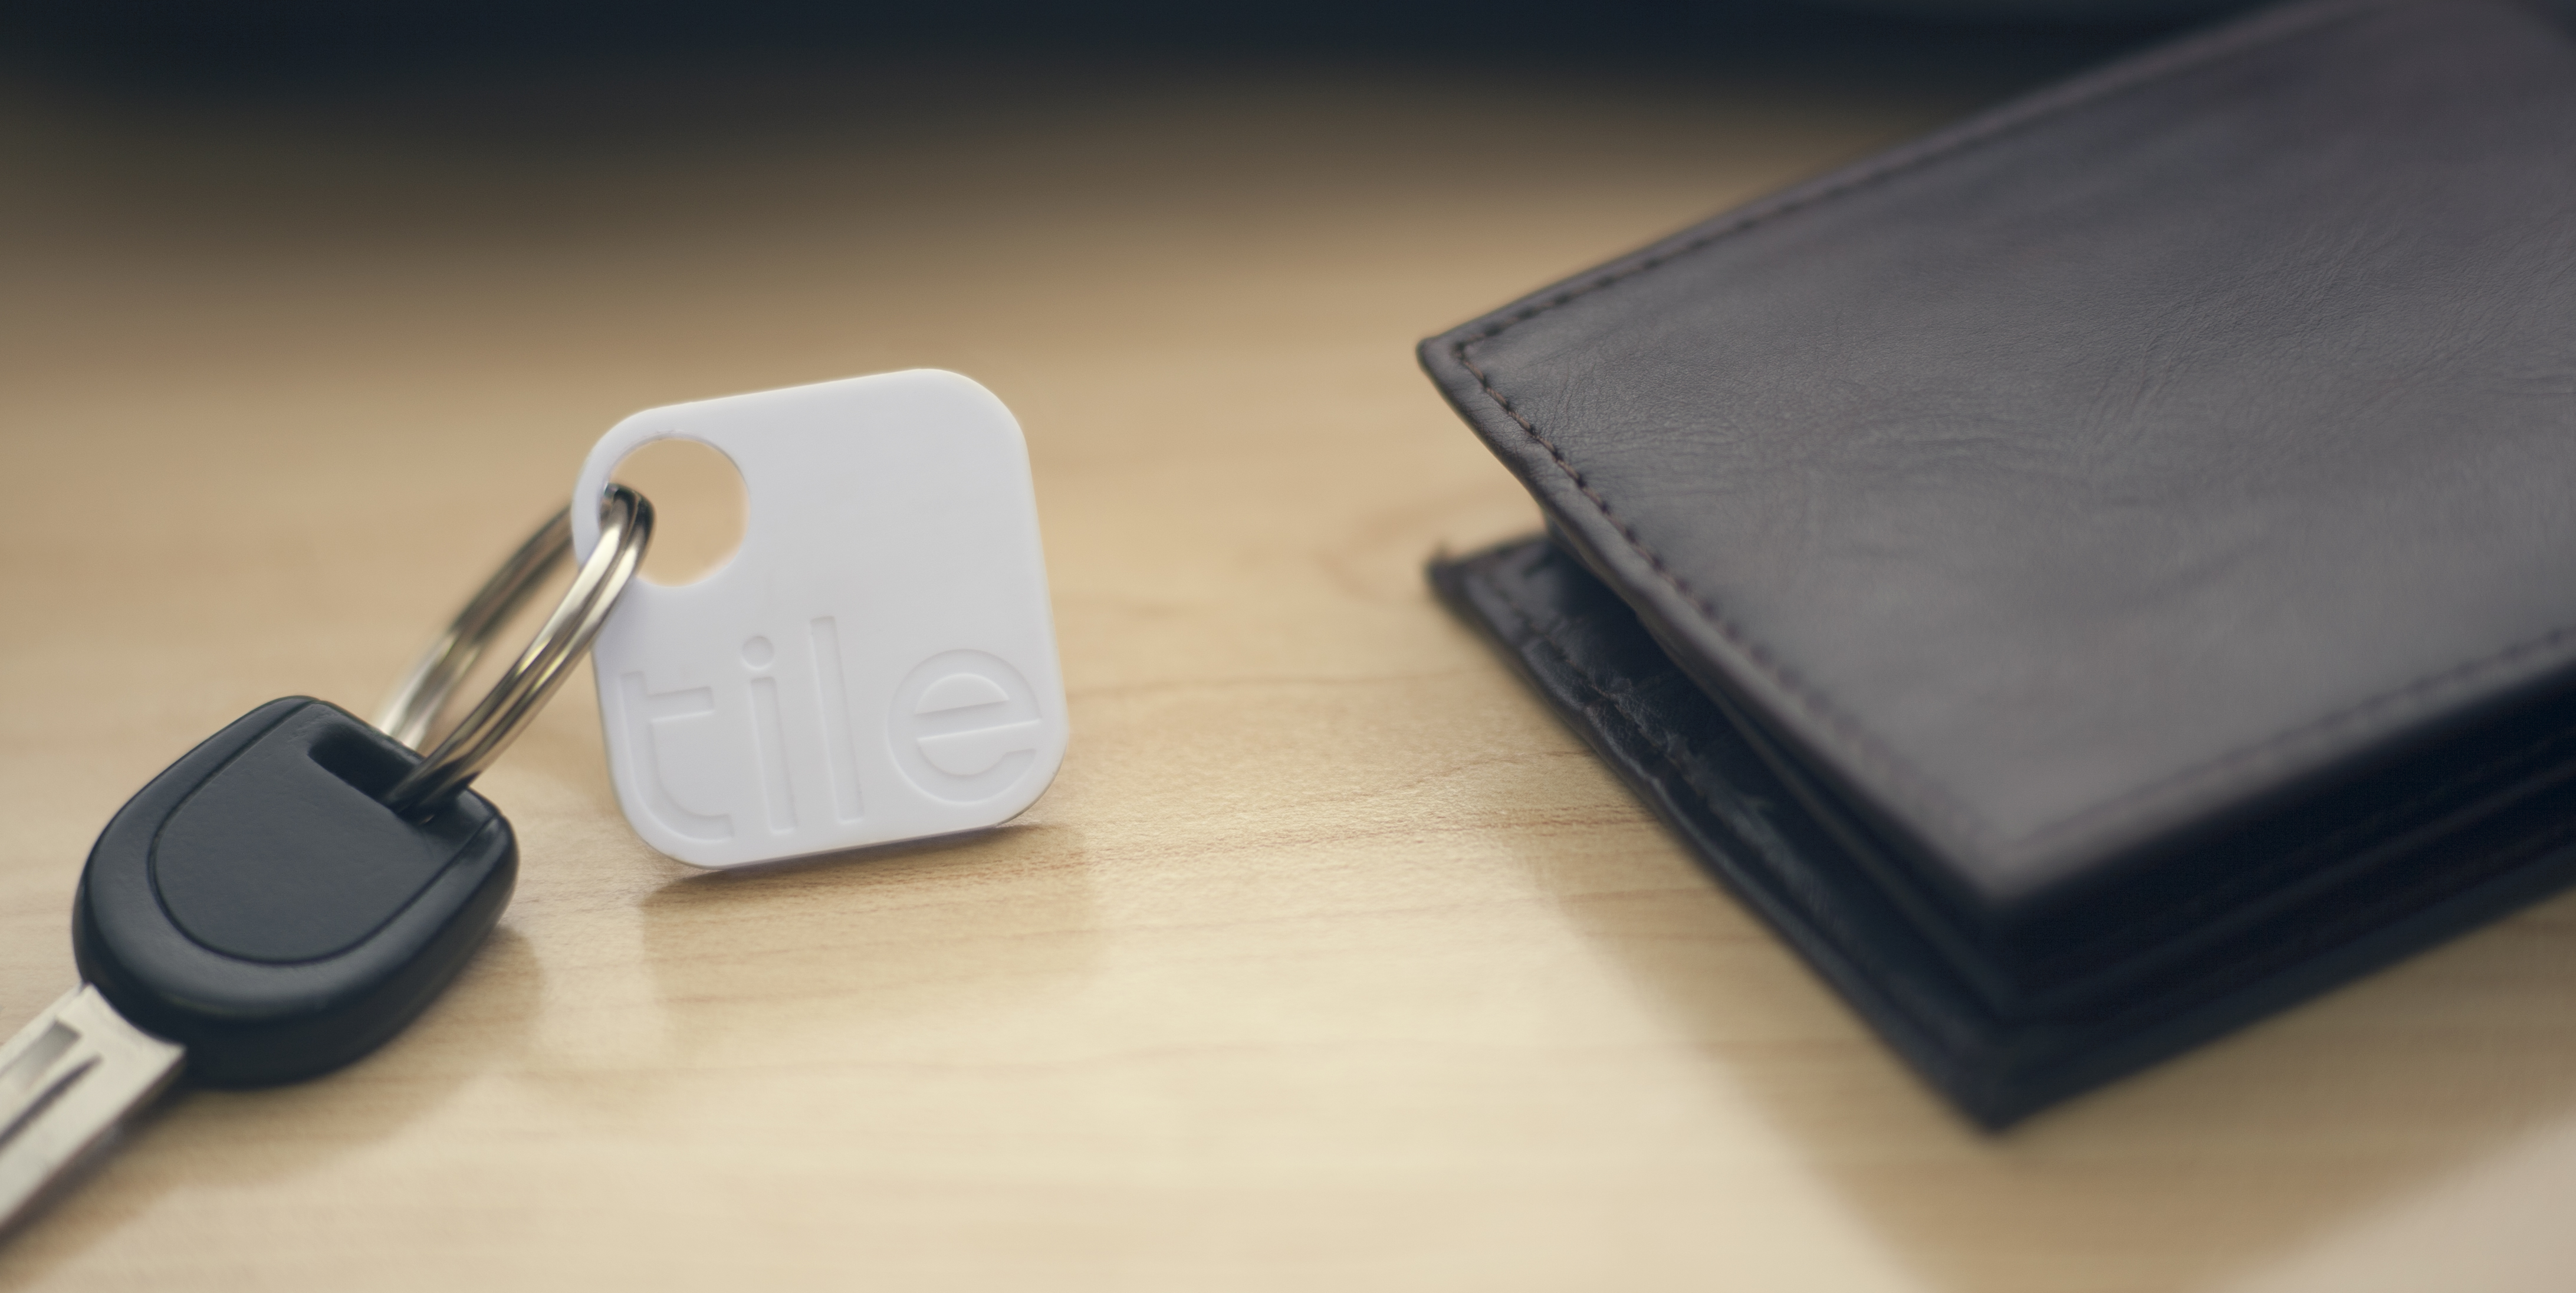 Tile: Track Your Stuff And Never Lose Anything Again